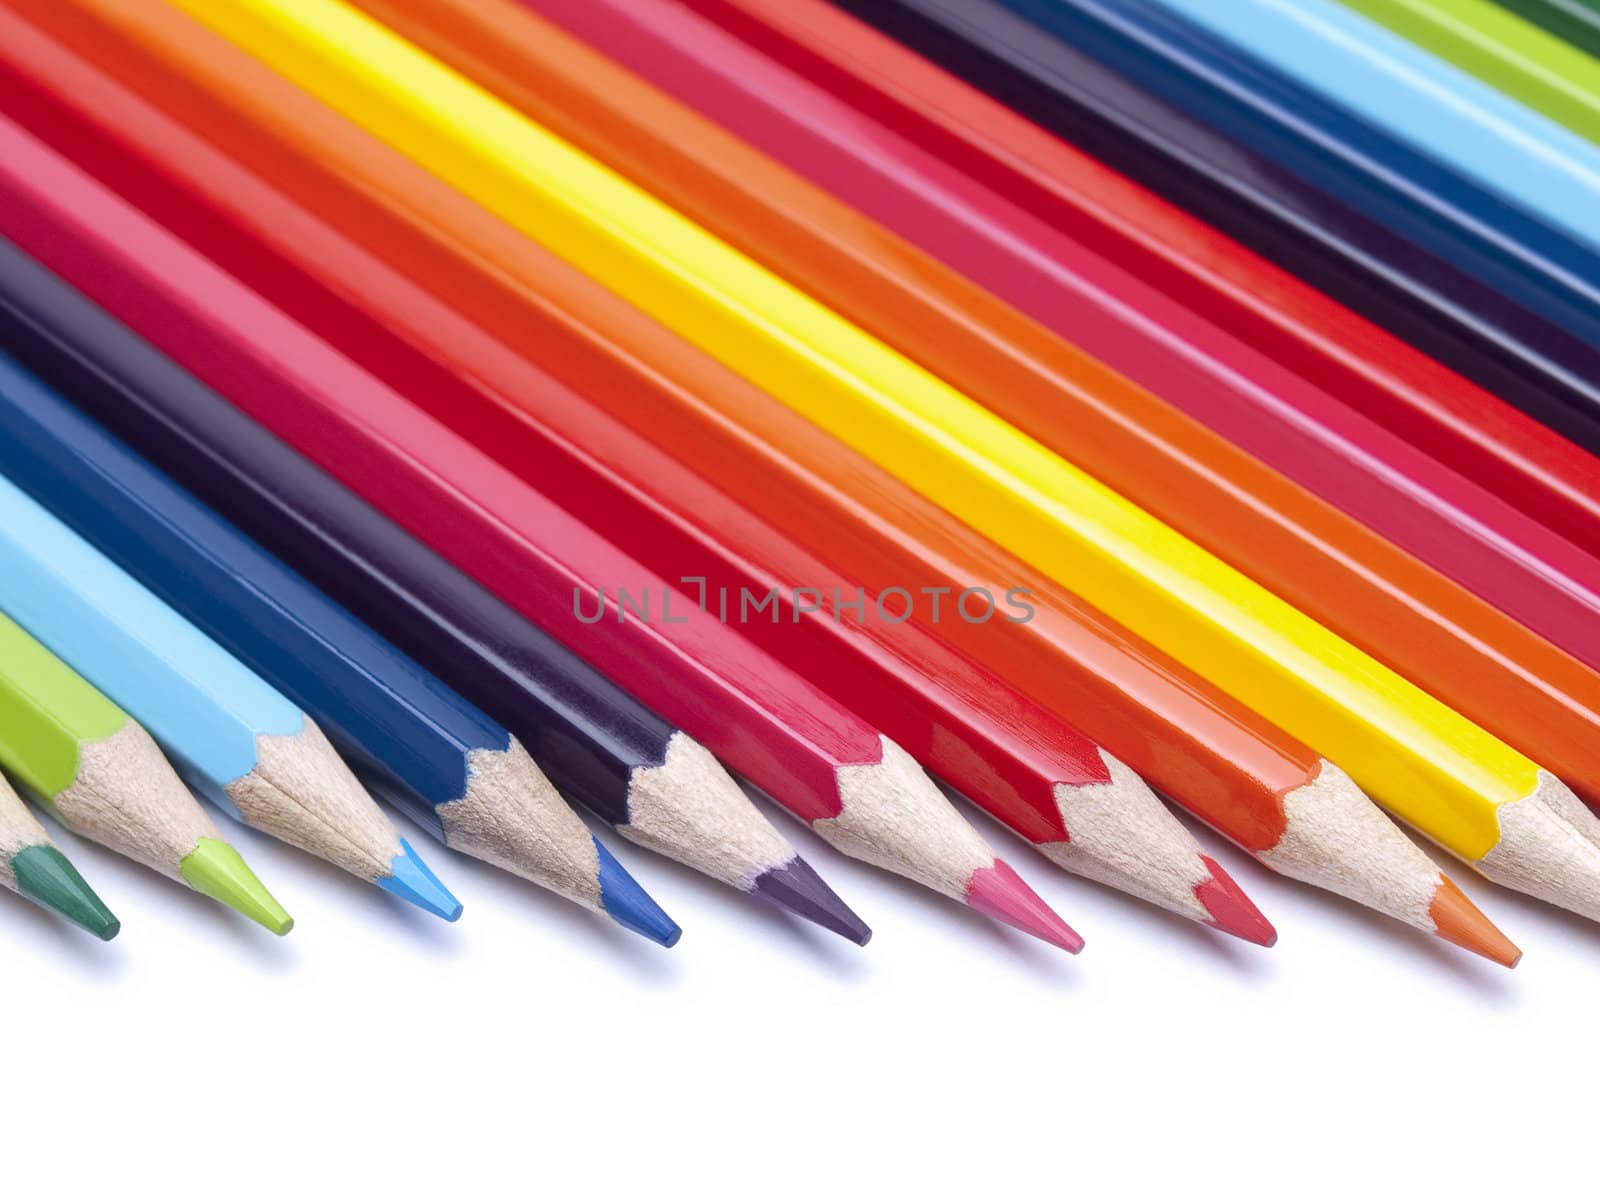 Colored pencils in formation pointing to the right.